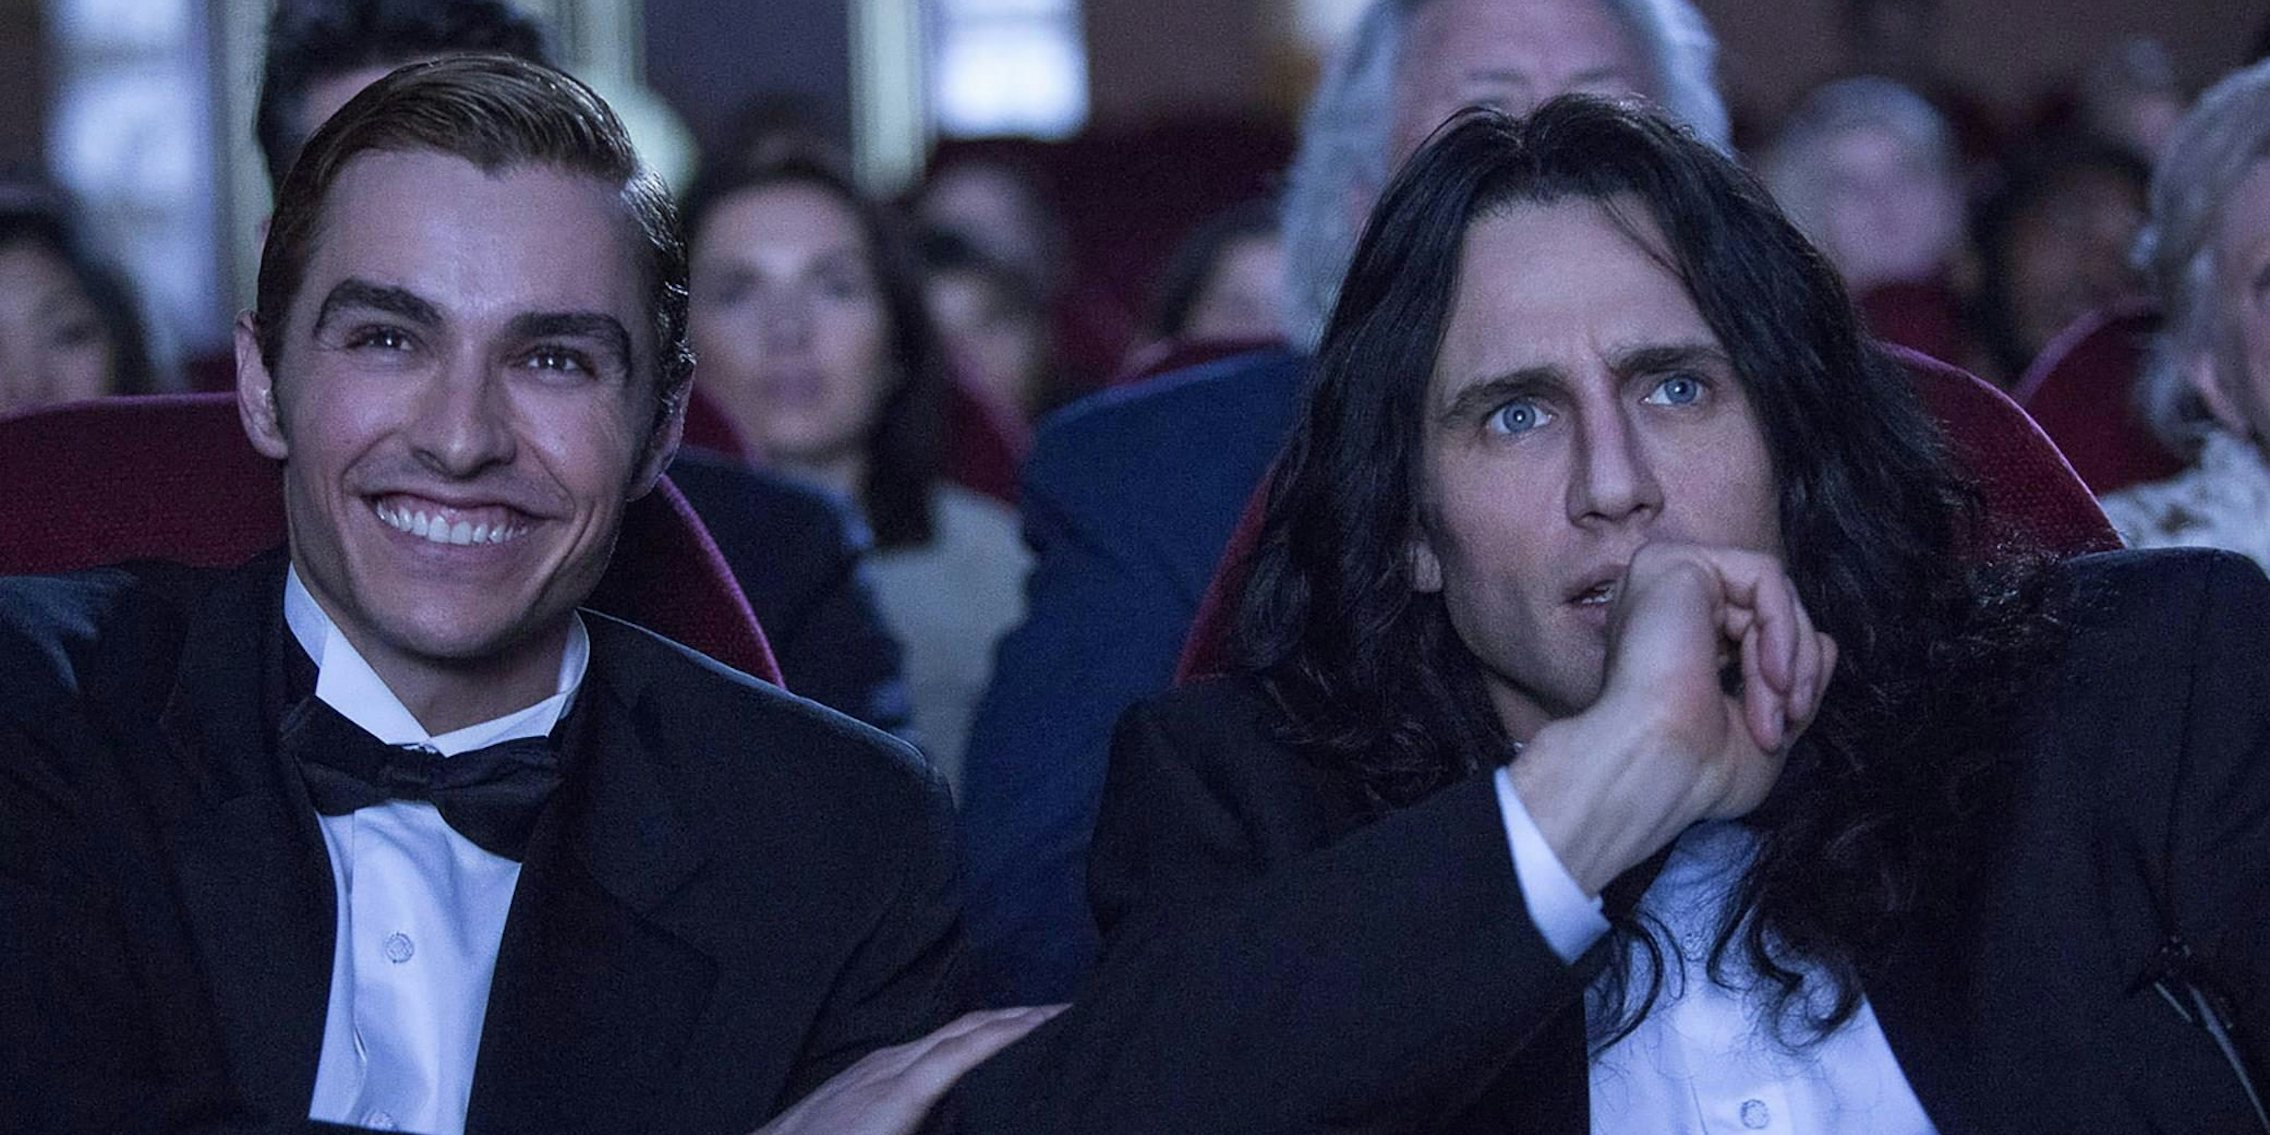 A still image featuring Dave Franco and James Franco from the SXSW film 'Disaster Artist' directed by James Franco.